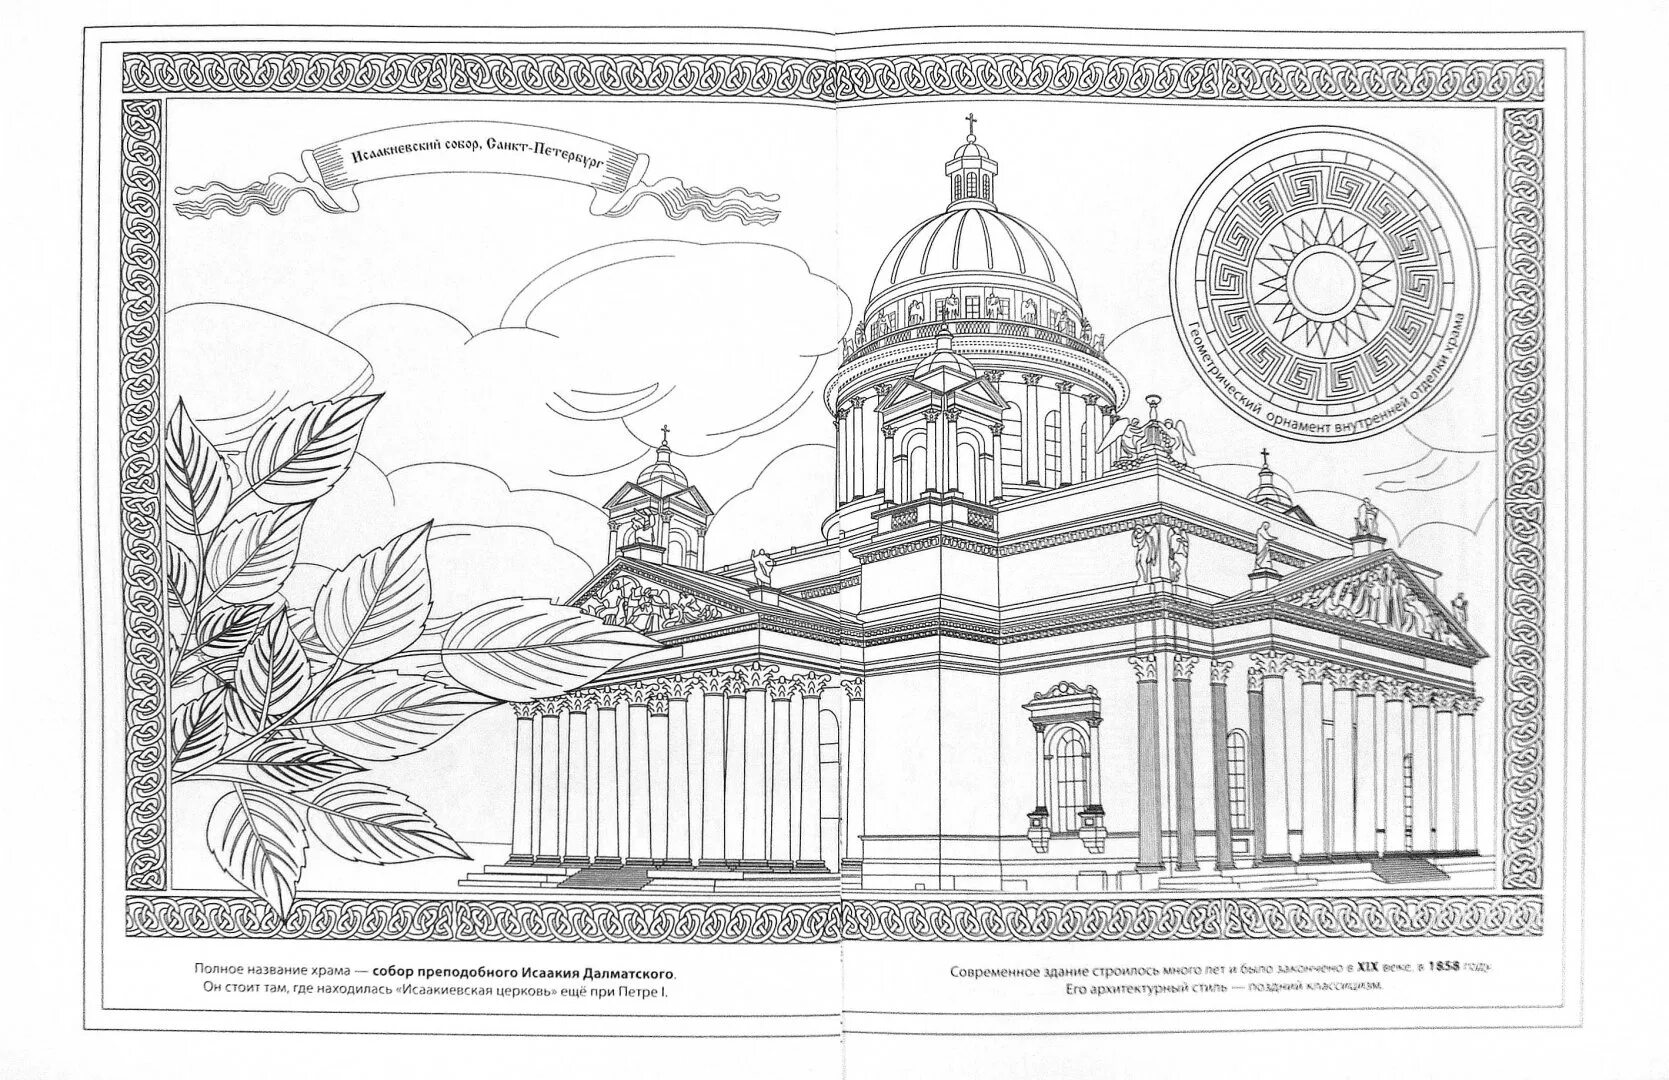 St. Isaac's Cathedral for children #1